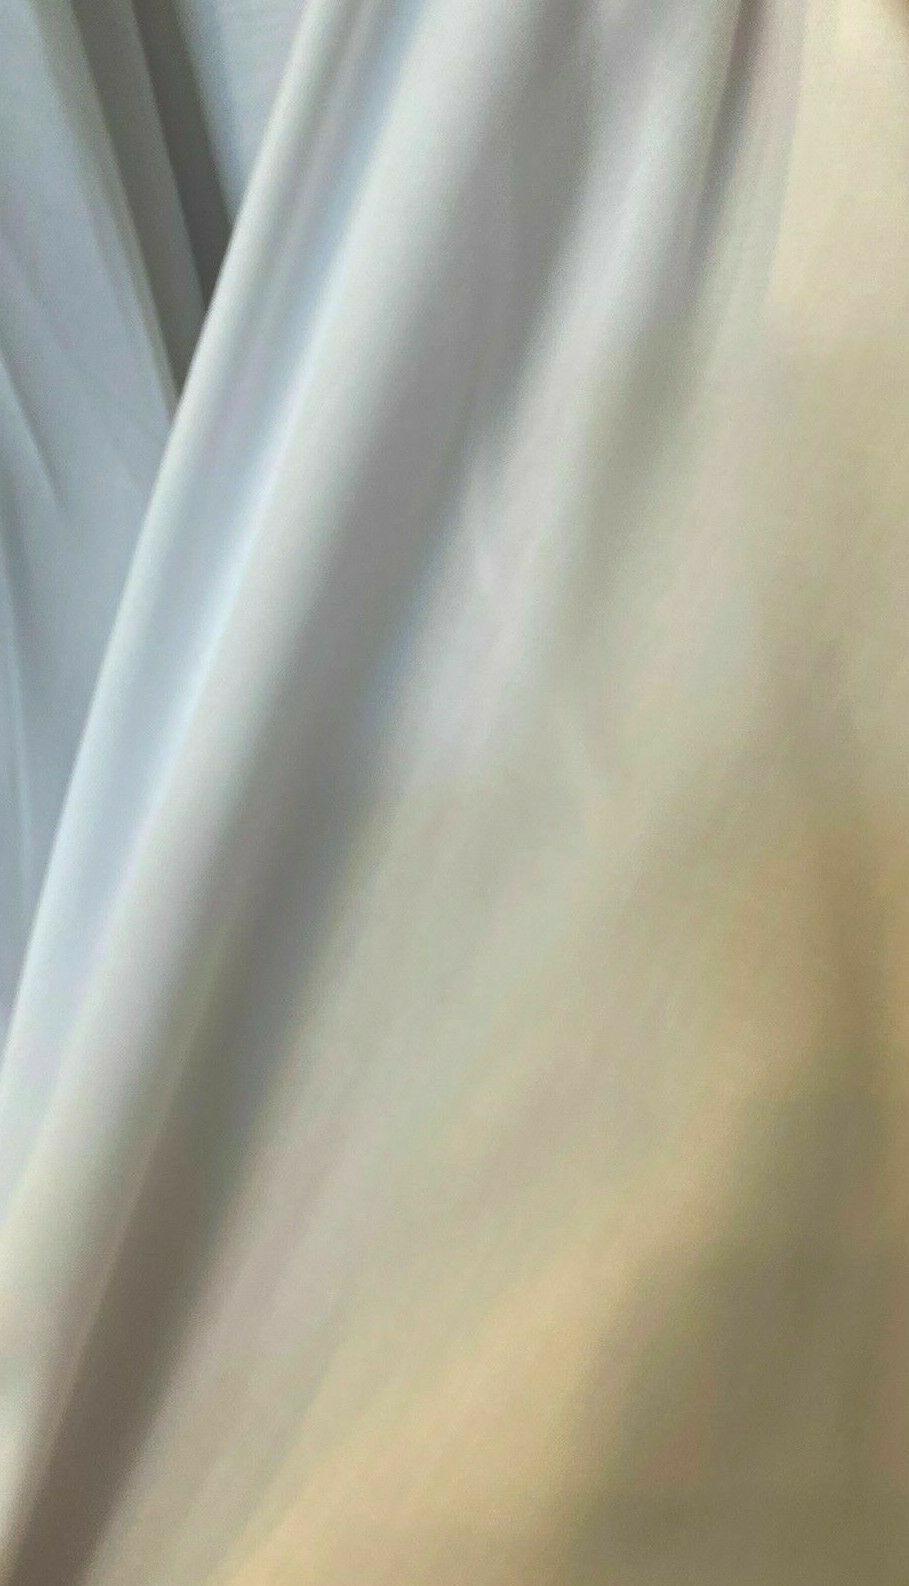 100% Cotton White Fabric by the Yard for 6.99/Yard x 60 Wide | White  Cotton Sheeting | Only 900 Yards Available | Mask Fabric, Shirt, Pouch